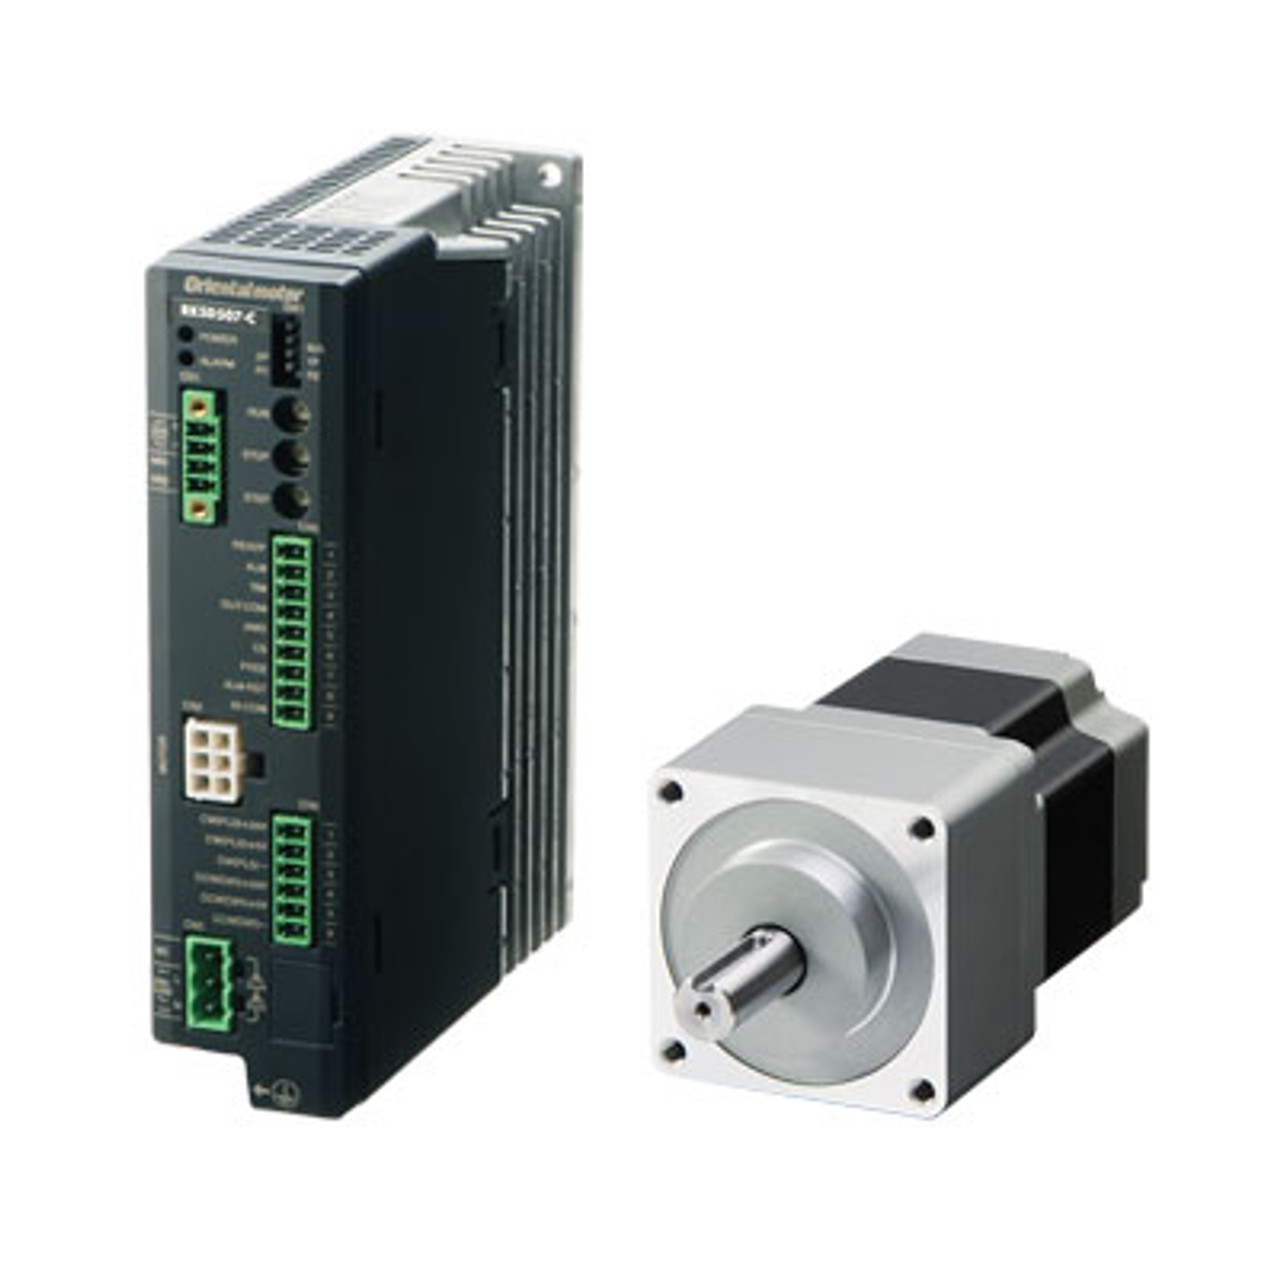 RKS564BC-PS25-3 - Product Image